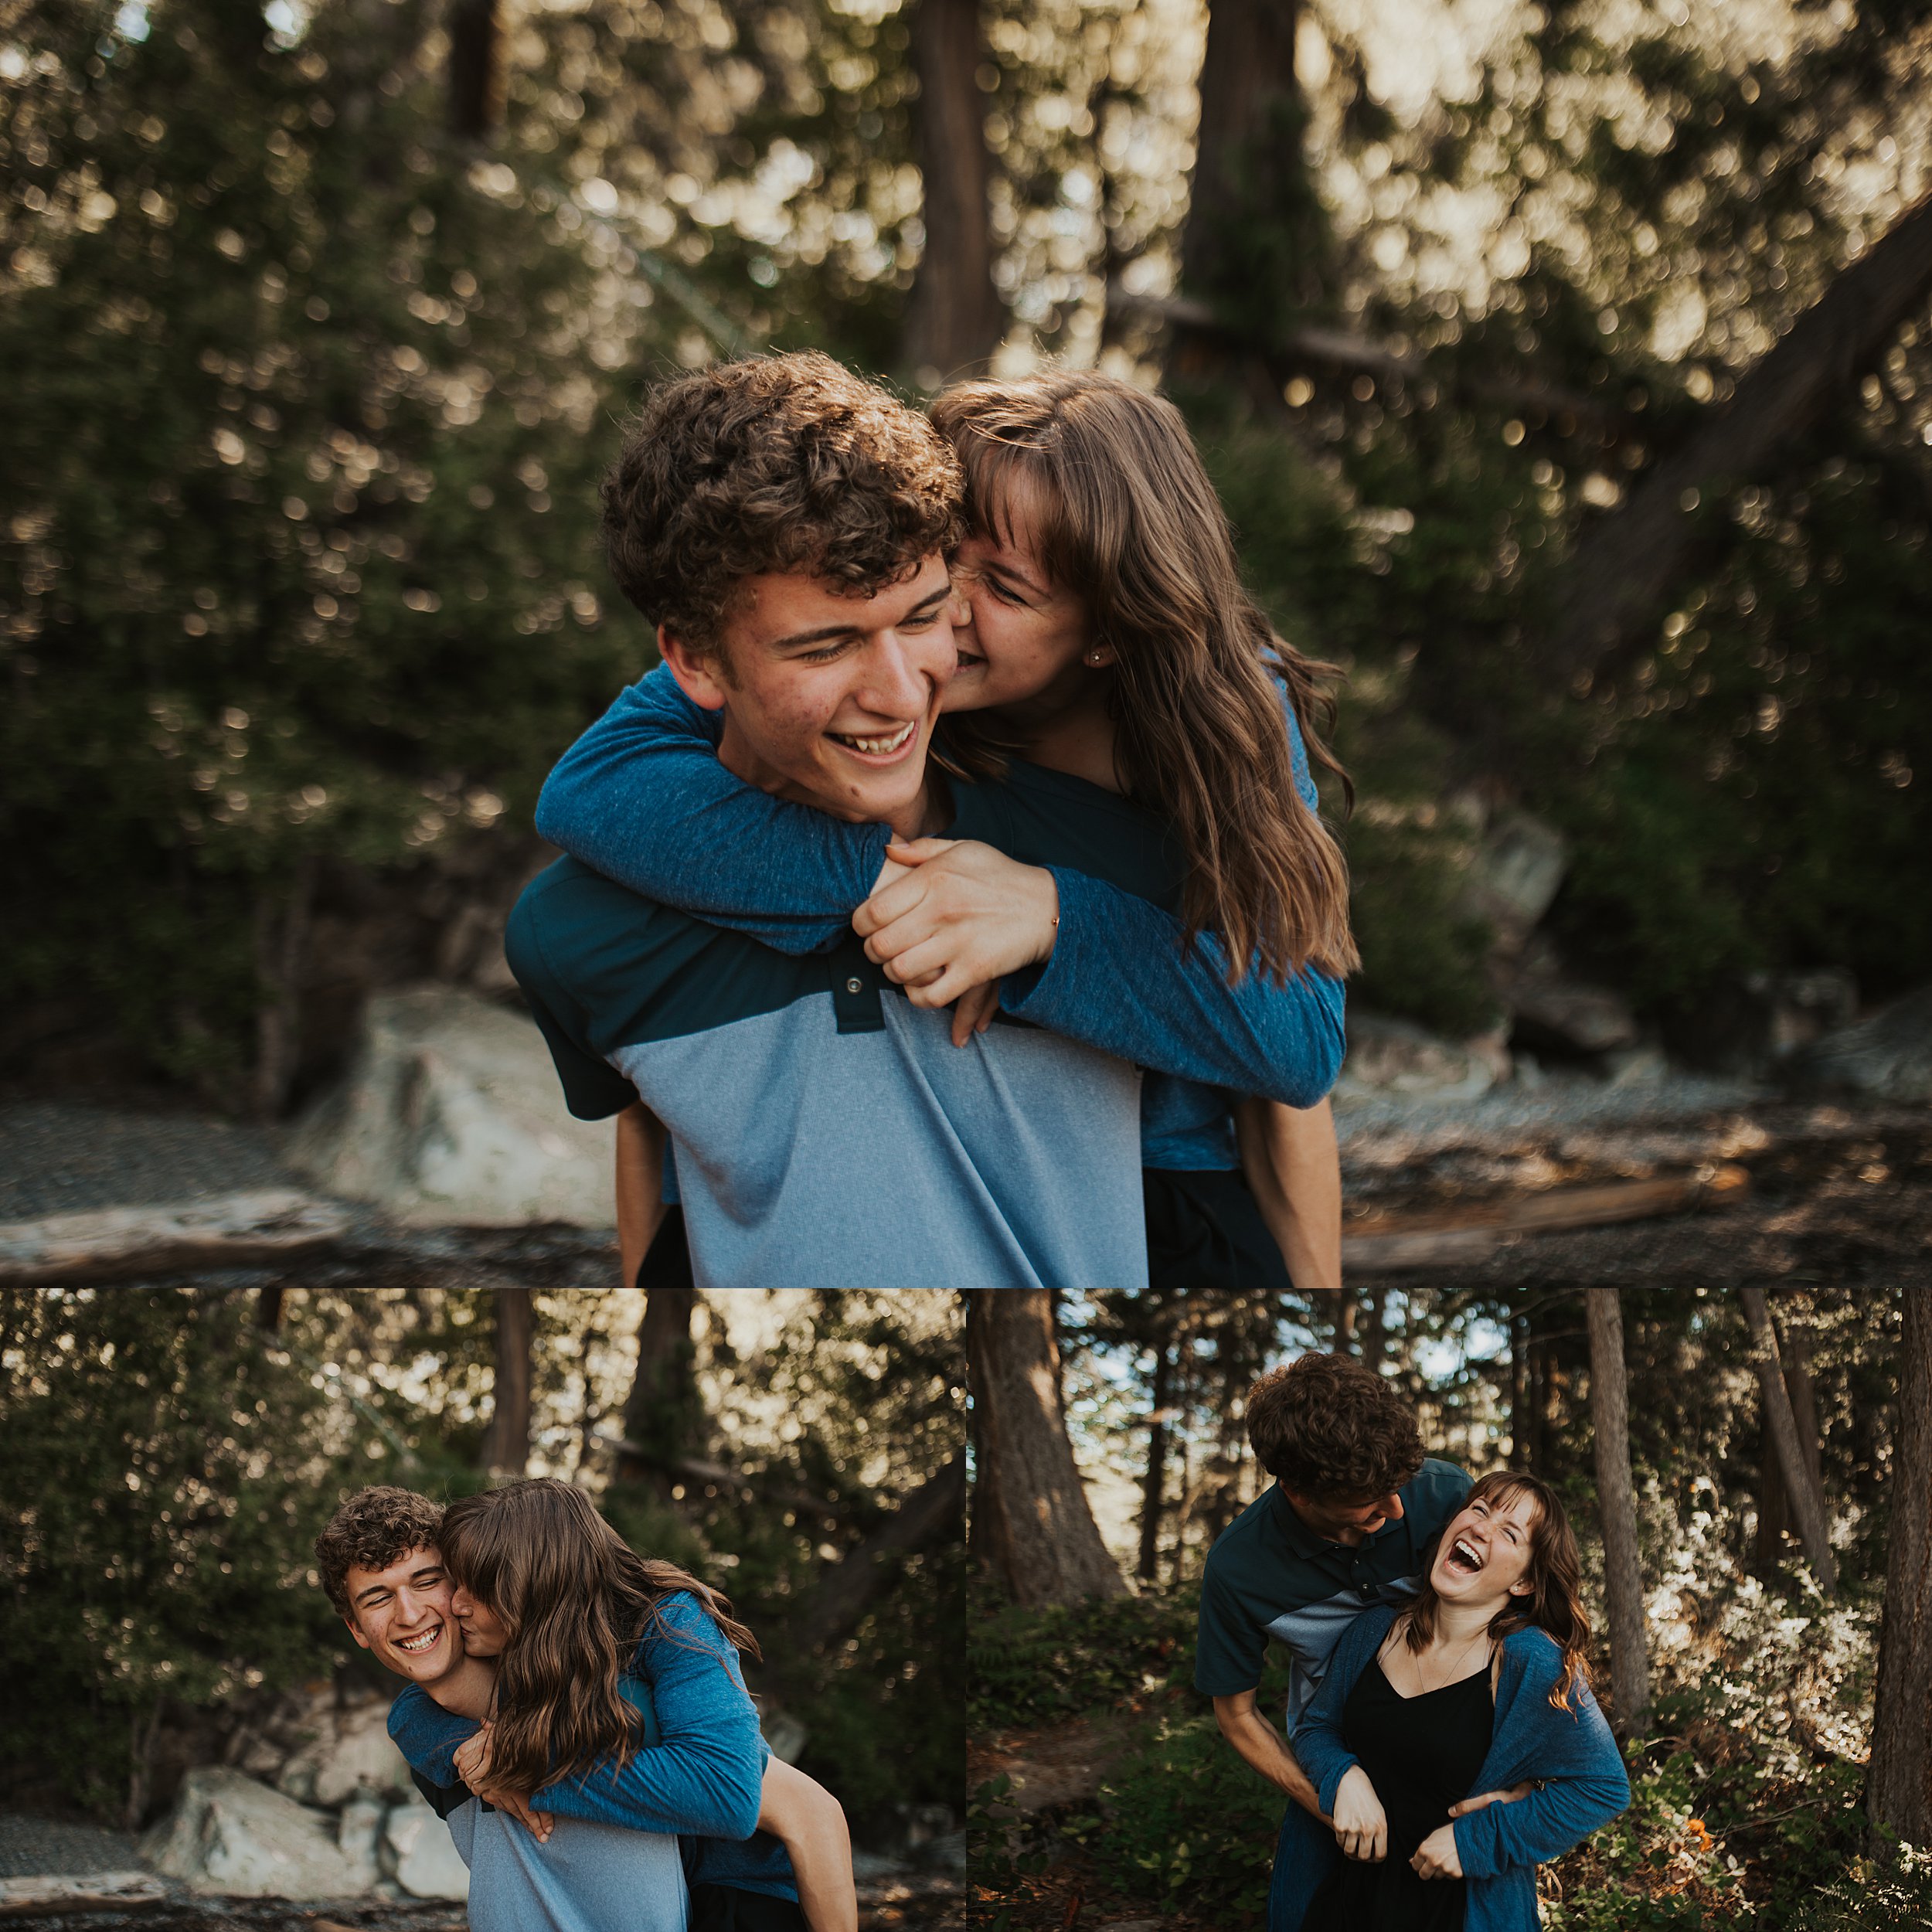 bellingham spring couples session in the rainforest